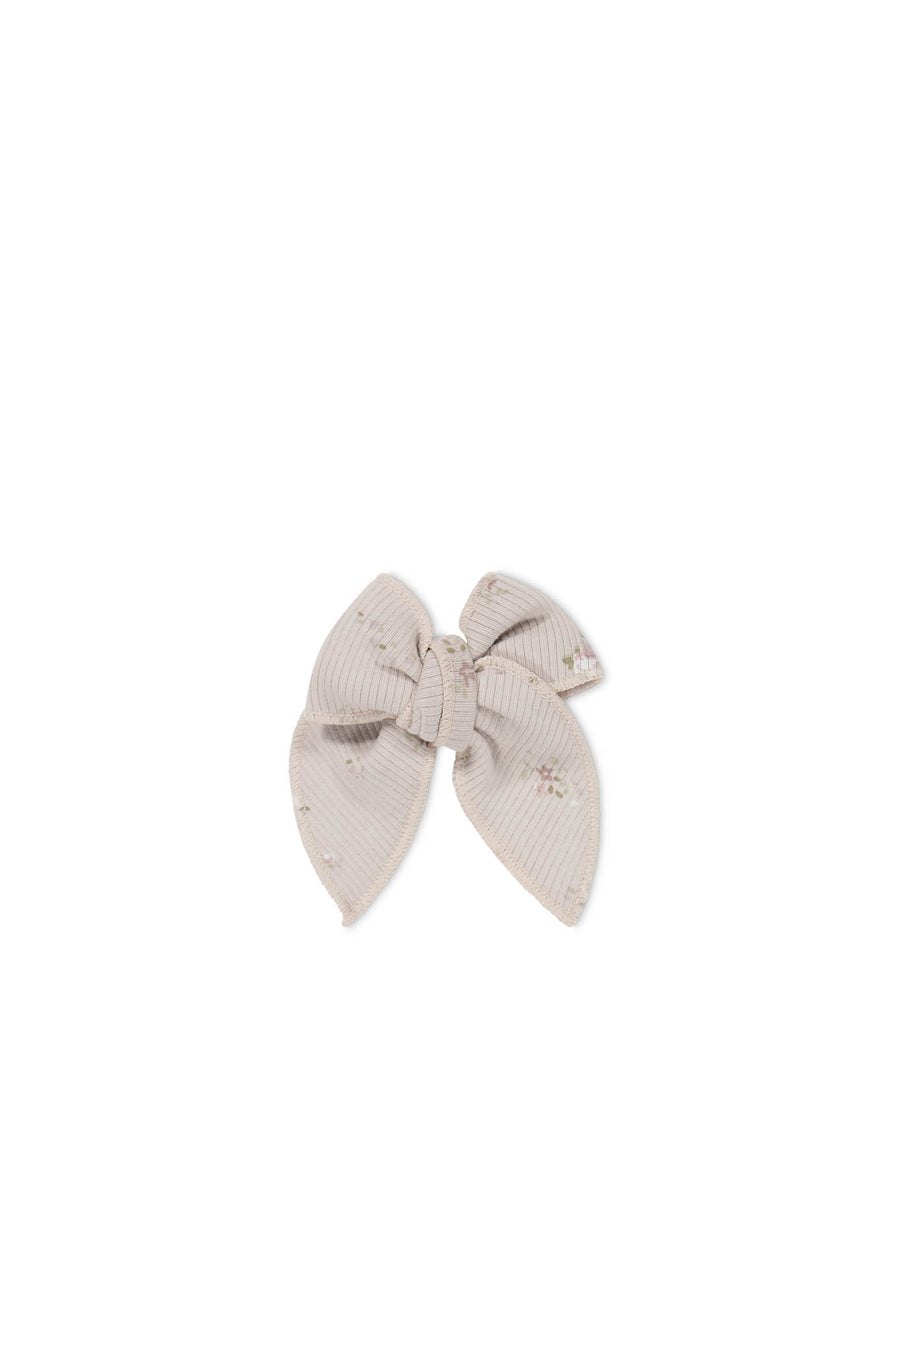 Organic Cotton Fine Rib Noelle Bow - Petite Fleur Violet Childrens Bow from Jamie Kay NZ